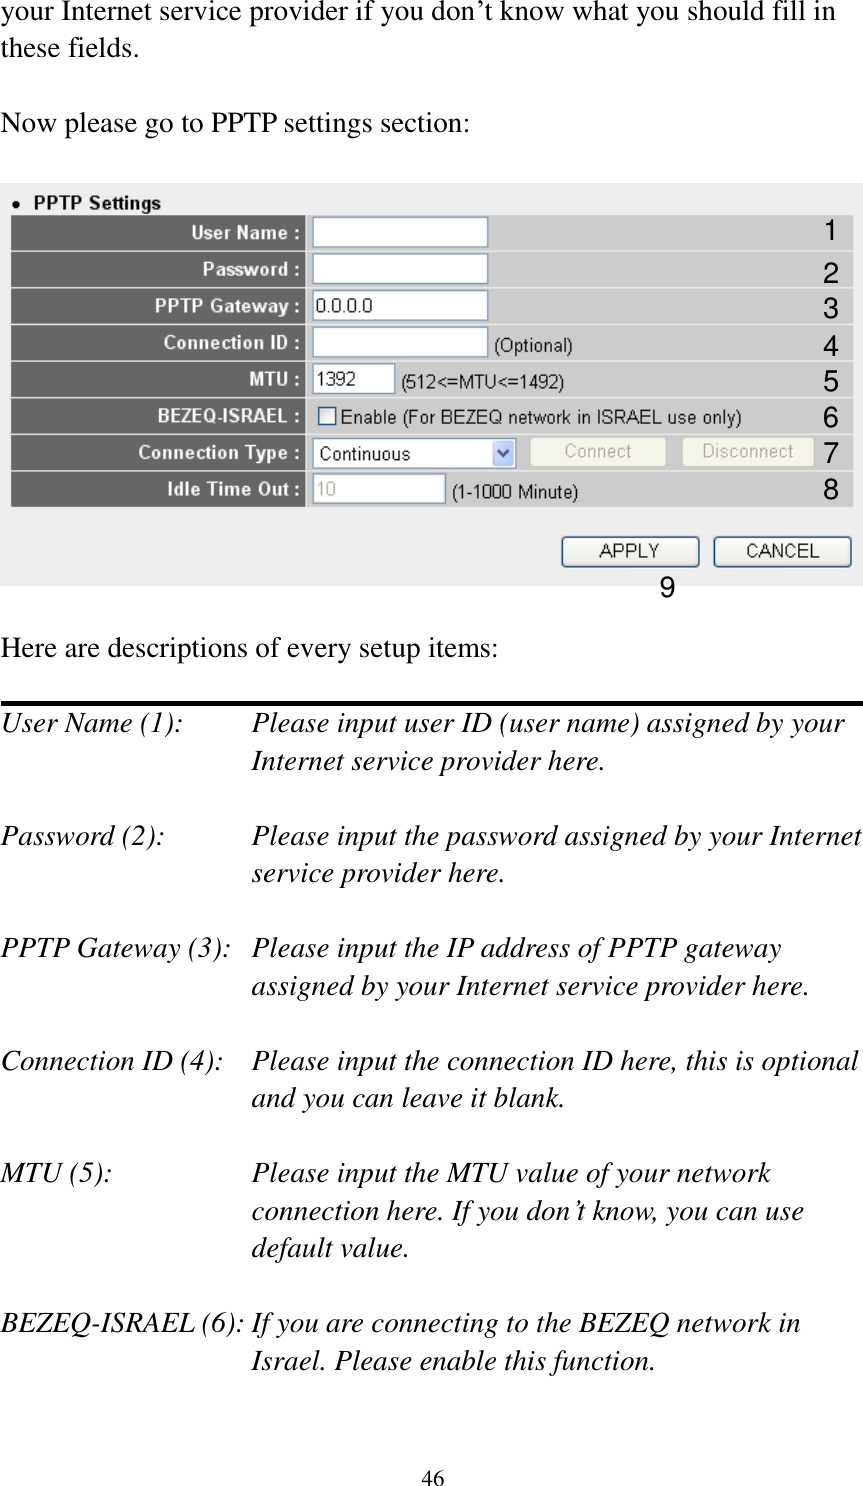 46 your Internet service provider if you don’t know what you should fill in these fields.  Now please go to PPTP settings section:    Here are descriptions of every setup items:  User Name (1):    Please input user ID (user name) assigned by your Internet service provider here.  Password (2):    Please input the password assigned by your Internet service provider here.  PPTP Gateway (3):   Please input the IP address of PPTP gateway assigned by your Internet service provider here.  Connection ID (4):    Please input the connection ID here, this is optional and you can leave it blank.  MTU (5):    Please input the MTU value of your network connection here. If you don’t know, you can use default value.  BEZEQ-ISRAEL (6): If you are connecting to the BEZEQ network in Israel. Please enable this function.  1 2 3 4 5 7 8 9 6 